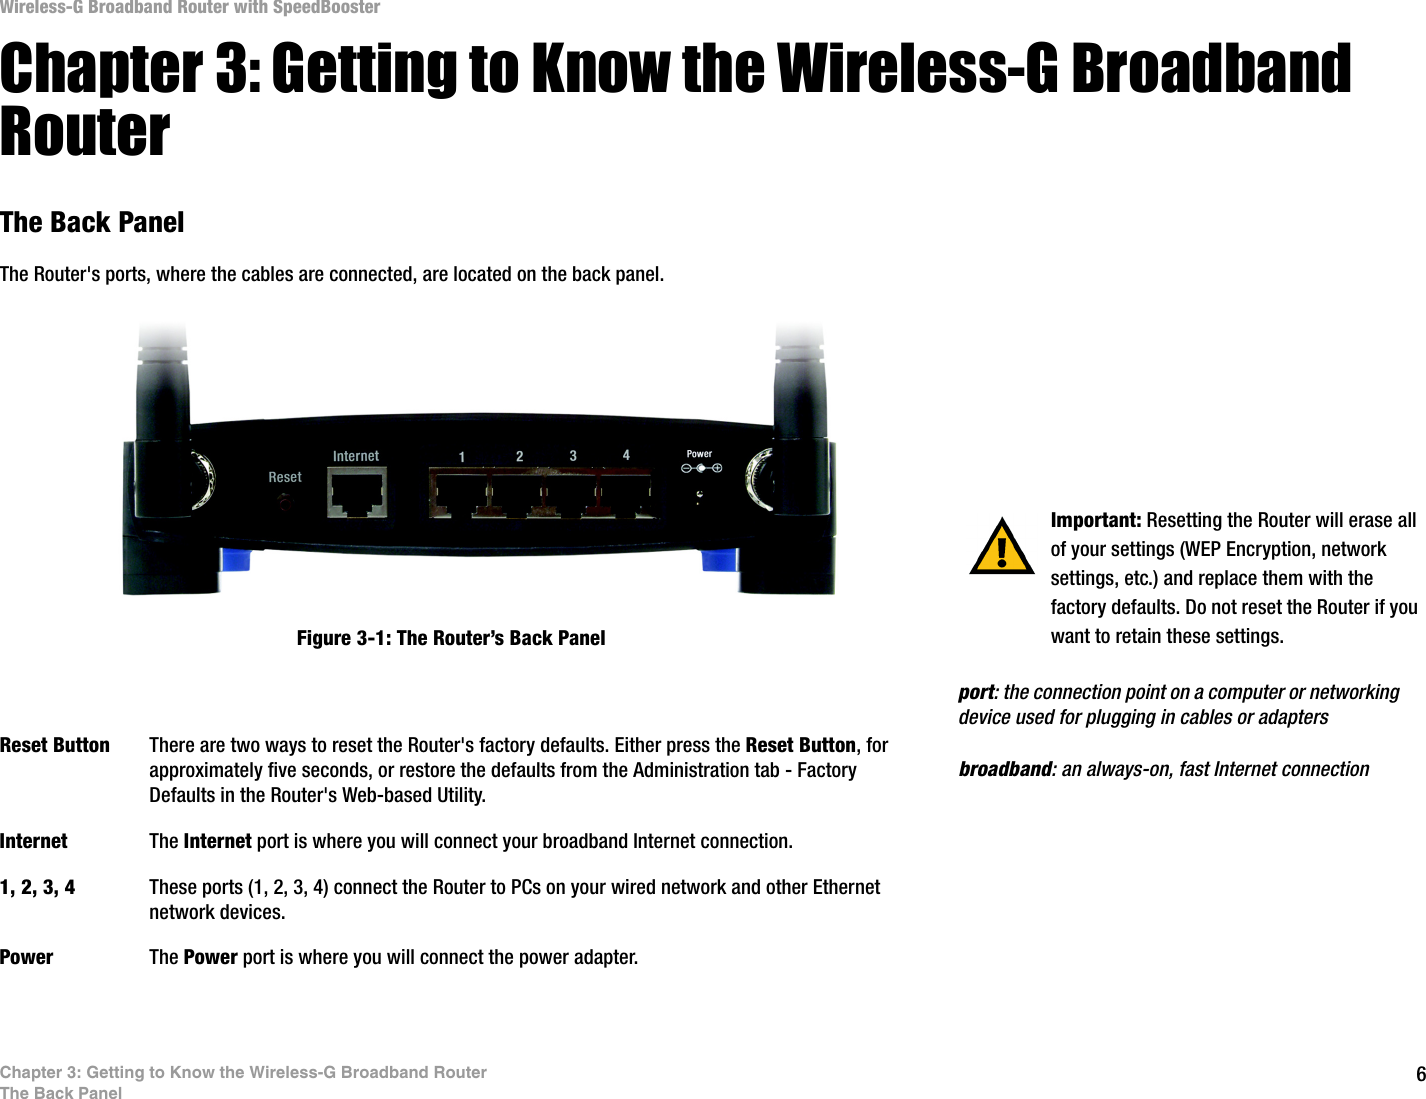 6Chapter 3: Getting to Know the Wireless-G Broadband RouterThe Back PanelWireless-G Broadband Router with SpeedBoosterChapter 3: Getting to Know the Wireless-G Broadband RouterThe Back PanelThe Router&apos;s ports, where the cables are connected, are located on the back panel.Reset Button There are two ways to reset the Router&apos;s factory defaults. Either press the Reset Button, for approximately five seconds, or restore the defaults from the Administration tab - Factory Defaults in the Router&apos;s Web-based Utility.Internet The Internet port is where you will connect your broadband Internet connection.1, 2, 3, 4 These ports (1, 2, 3, 4) connect the Router to PCs on your wired network and other Ethernet network devices.Power The Power port is where you will connect the power adapter. Important: Resetting the Router will erase all of your settings (WEP Encryption, network settings, etc.) and replace them with the factory defaults. Do not reset the Router if you want to retain these settings.Figure 3-1: The Router’s Back Panelbroadband: an always-on, fast Internet connectionport: the connection point on a computer or networking device used for plugging in cables or adapters